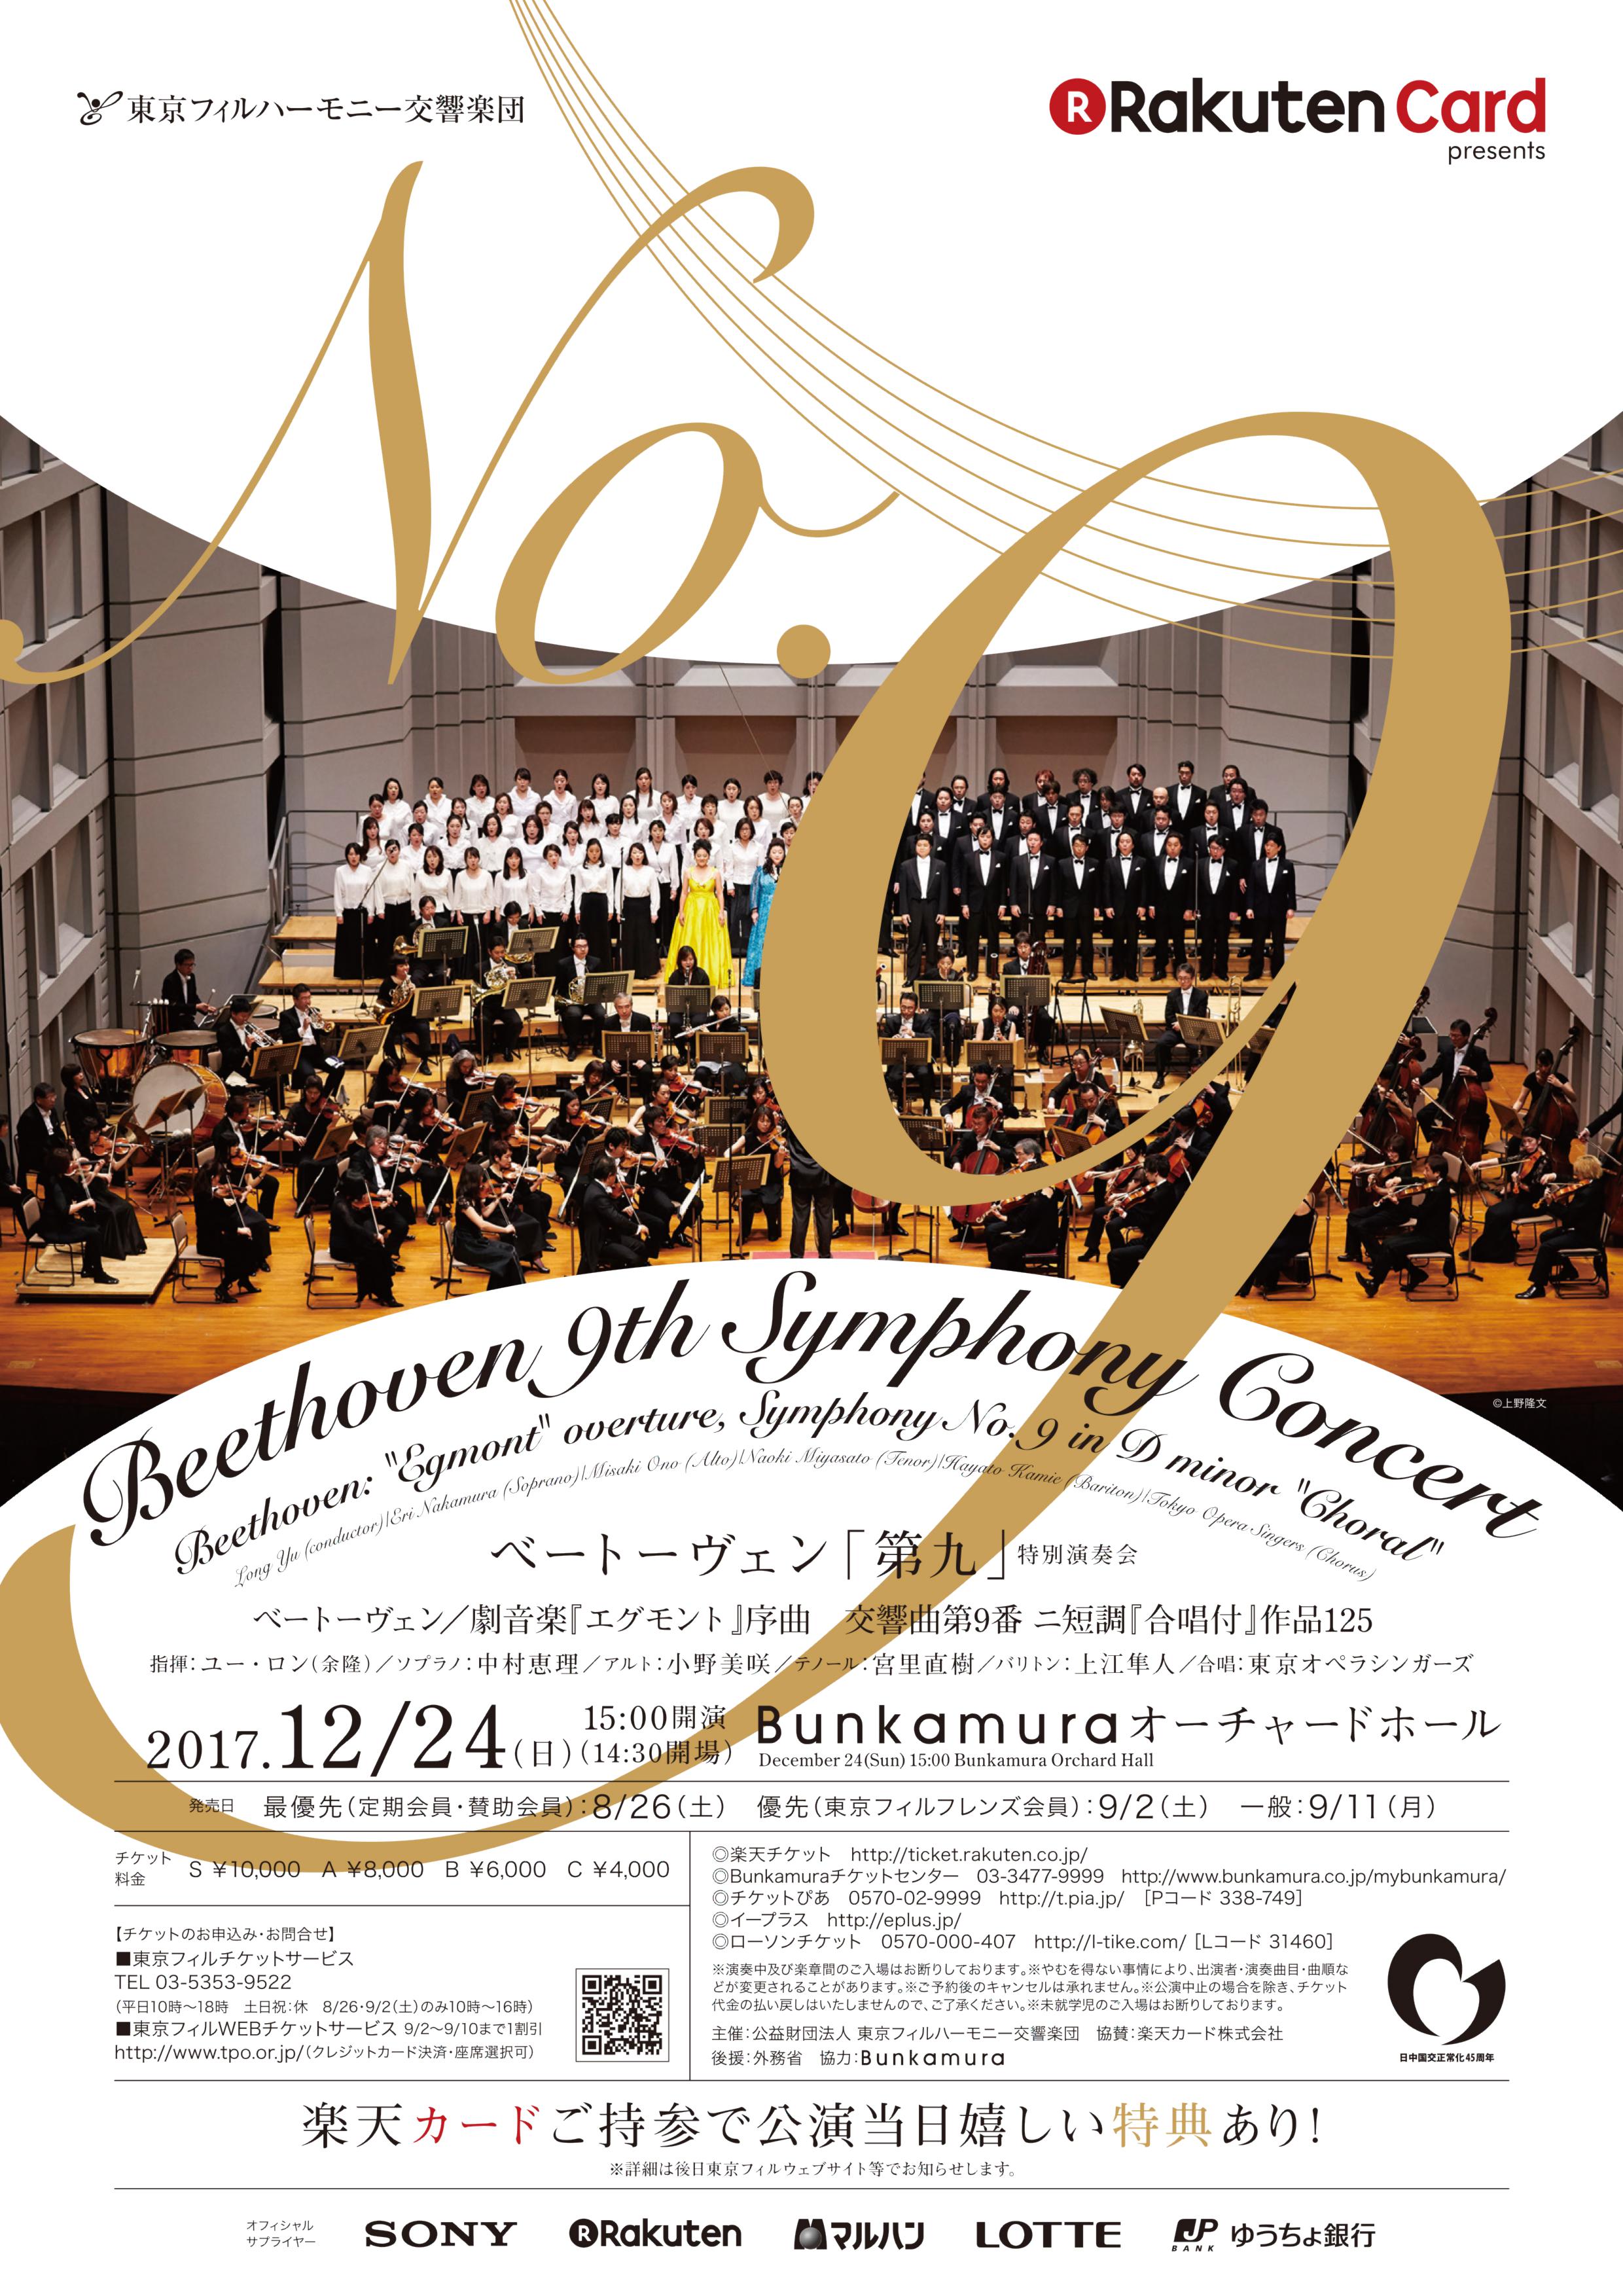 Beethoven 9th Symphony Concert